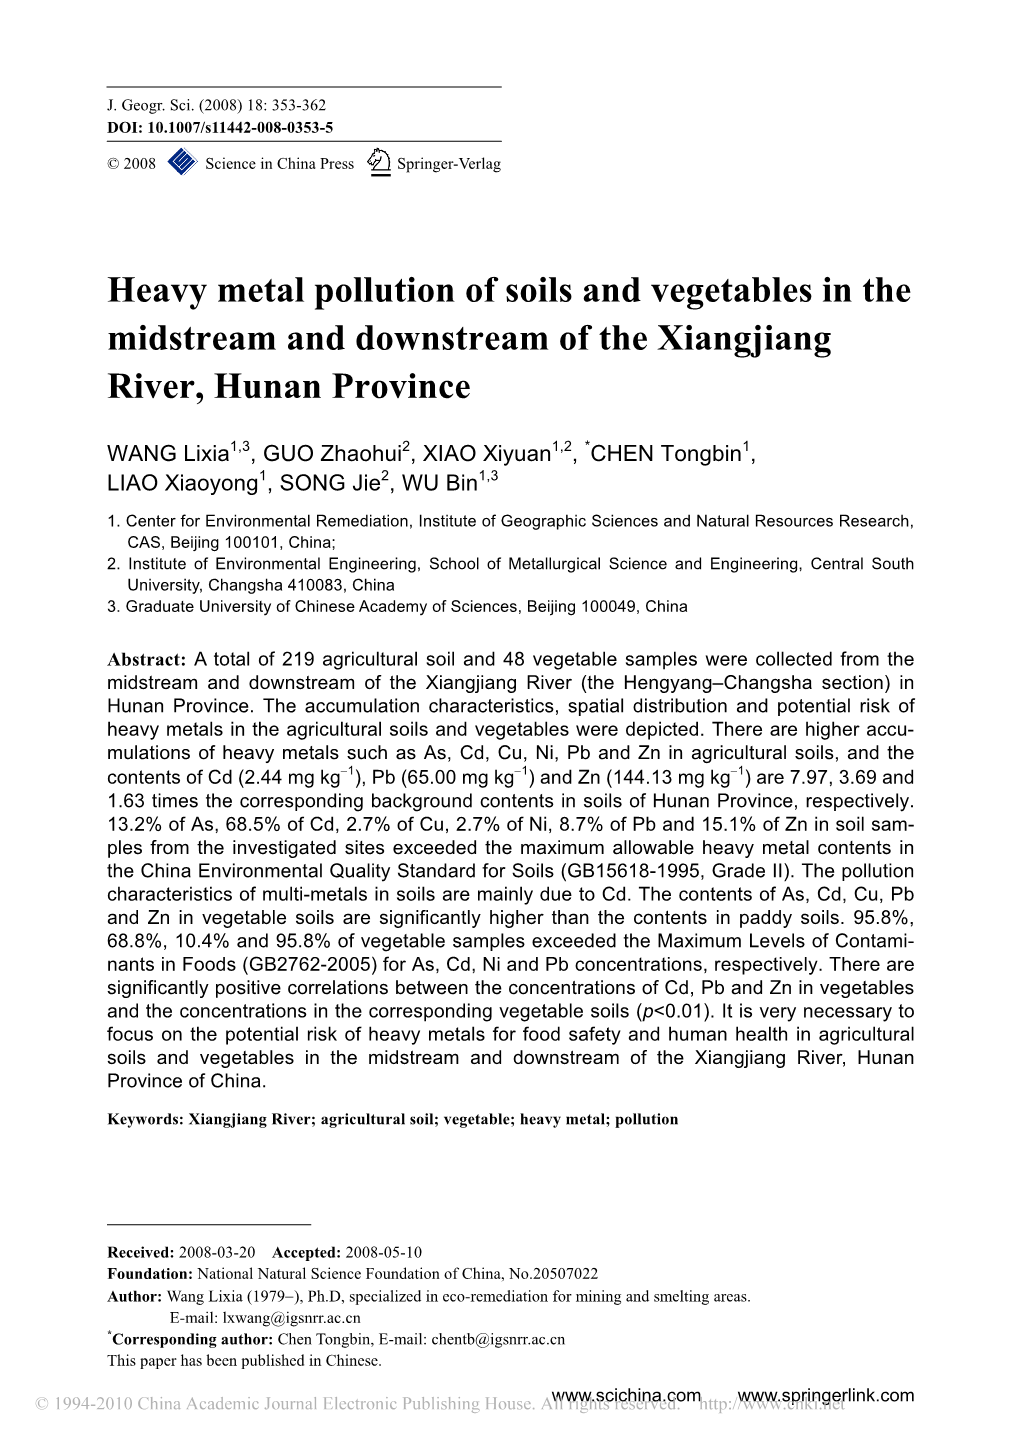 Heavy Metal Pollution of Soils and Vegetables in the Midstream and Downstream of the Xiangjiang River, Hunan Province